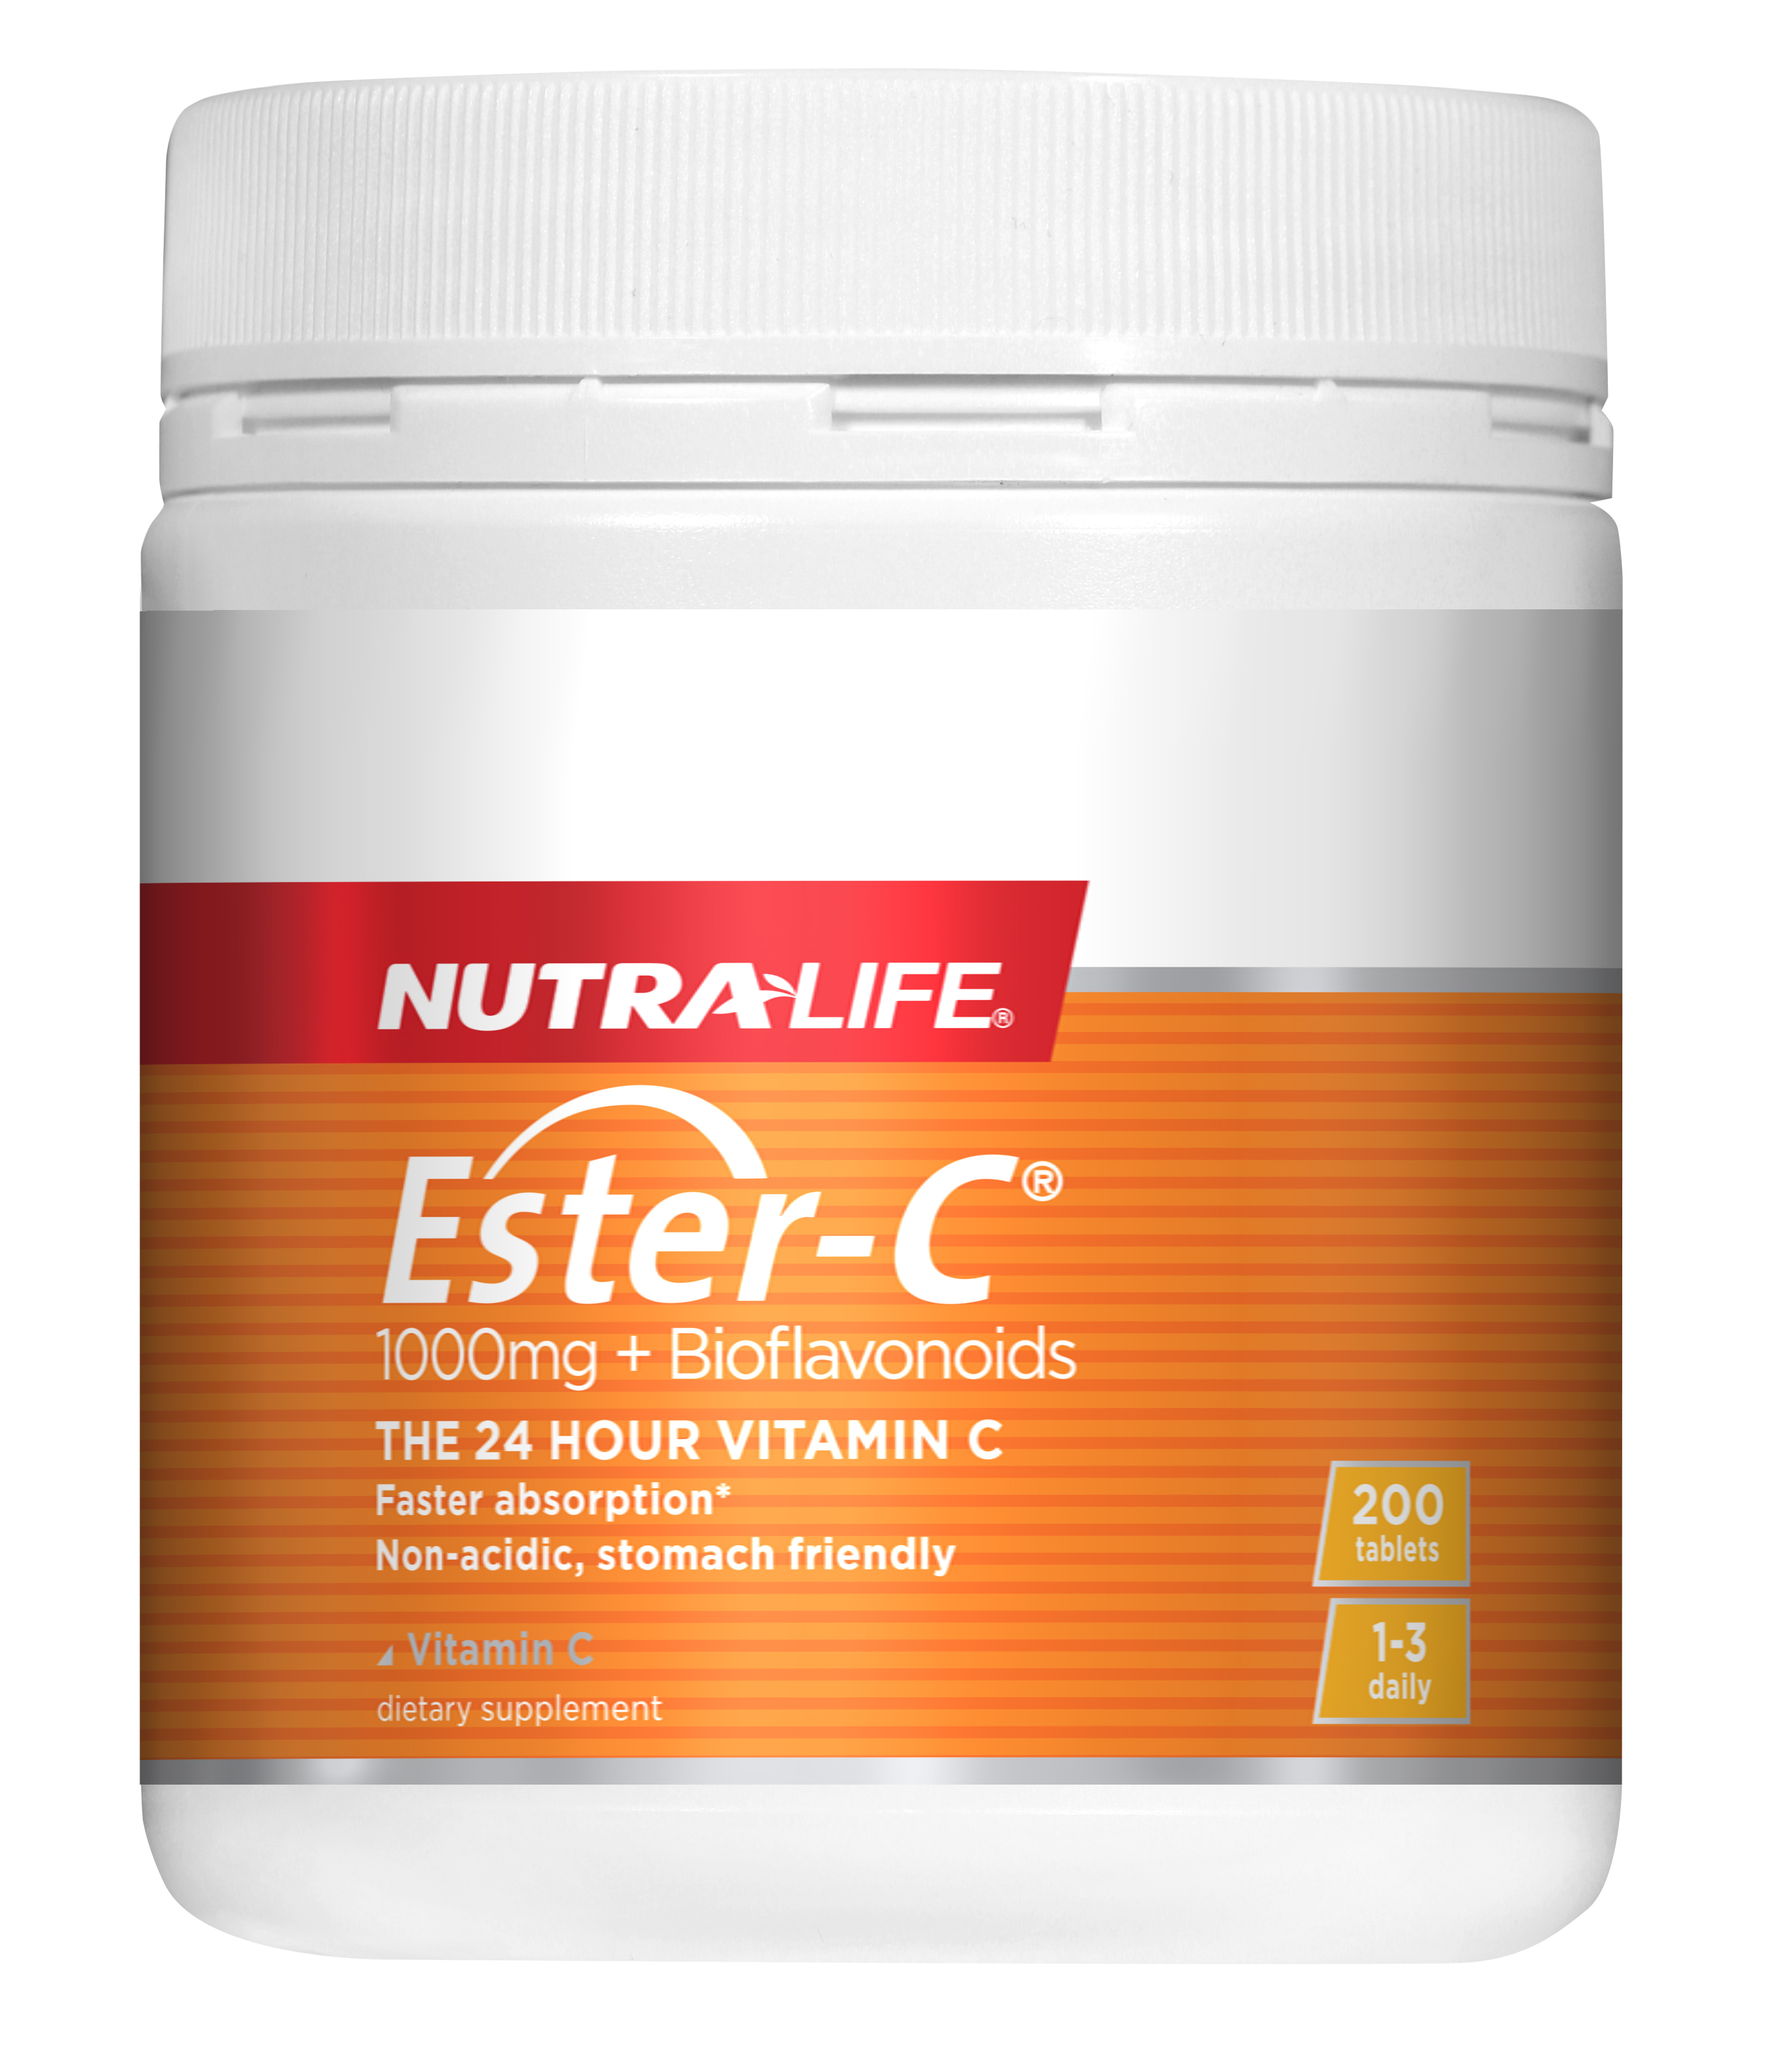 Nutra-life Ester C + Bioflavonoids 1000mg 200 Tablets